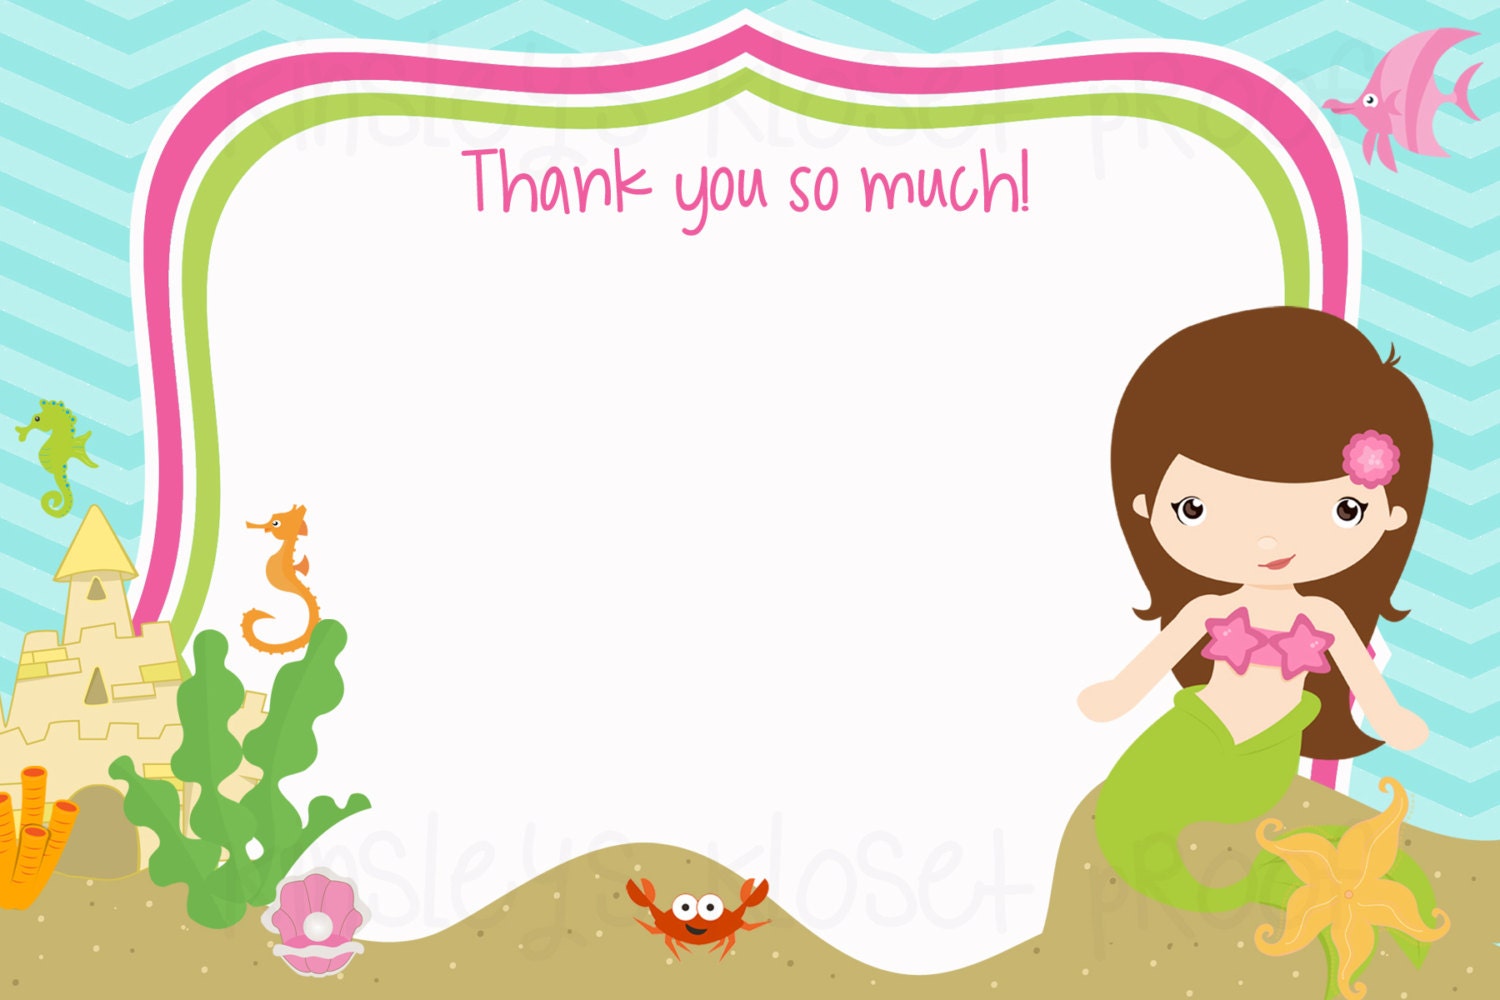 mermaid-thank-you-cards-printable-party-thank-you-cards